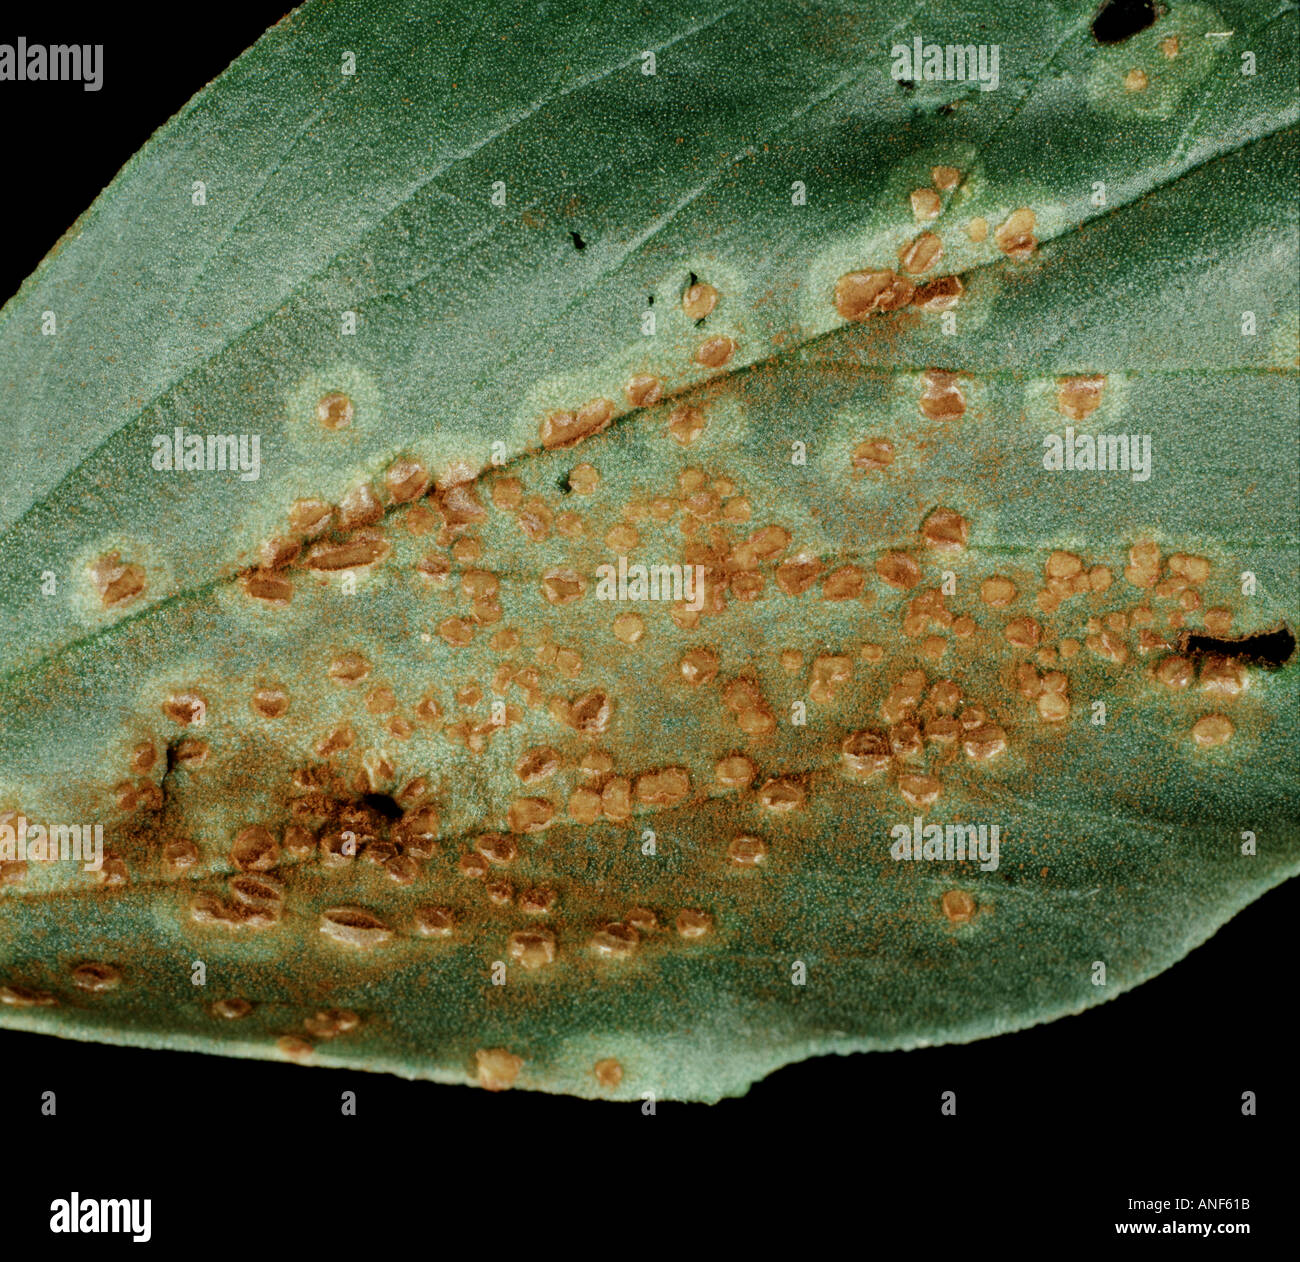 Pustules of field or broad bean rust Uromyces fabae on the top surface of a vicia bean leaf VIcia faba Stock Photo